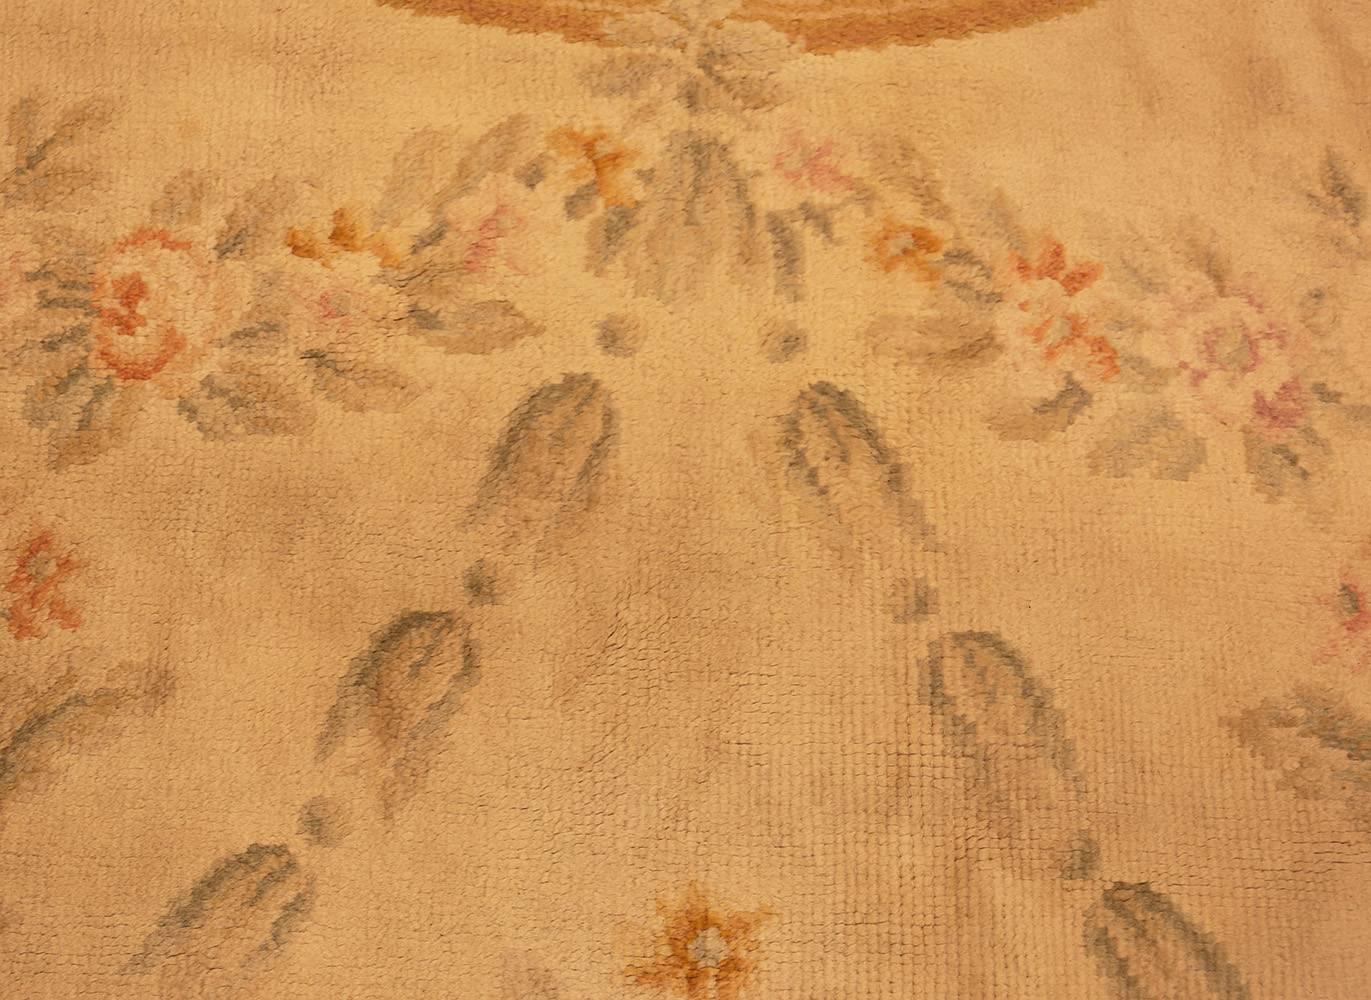 Large size floral antique French Savonnerie carpet, country of origin: France, date circa, late 19th century. Size: 14 ft x 17 ft (4.27 m x 5.18 m)

Delicate medallions are one of the most defining features of the soft and decorative antique